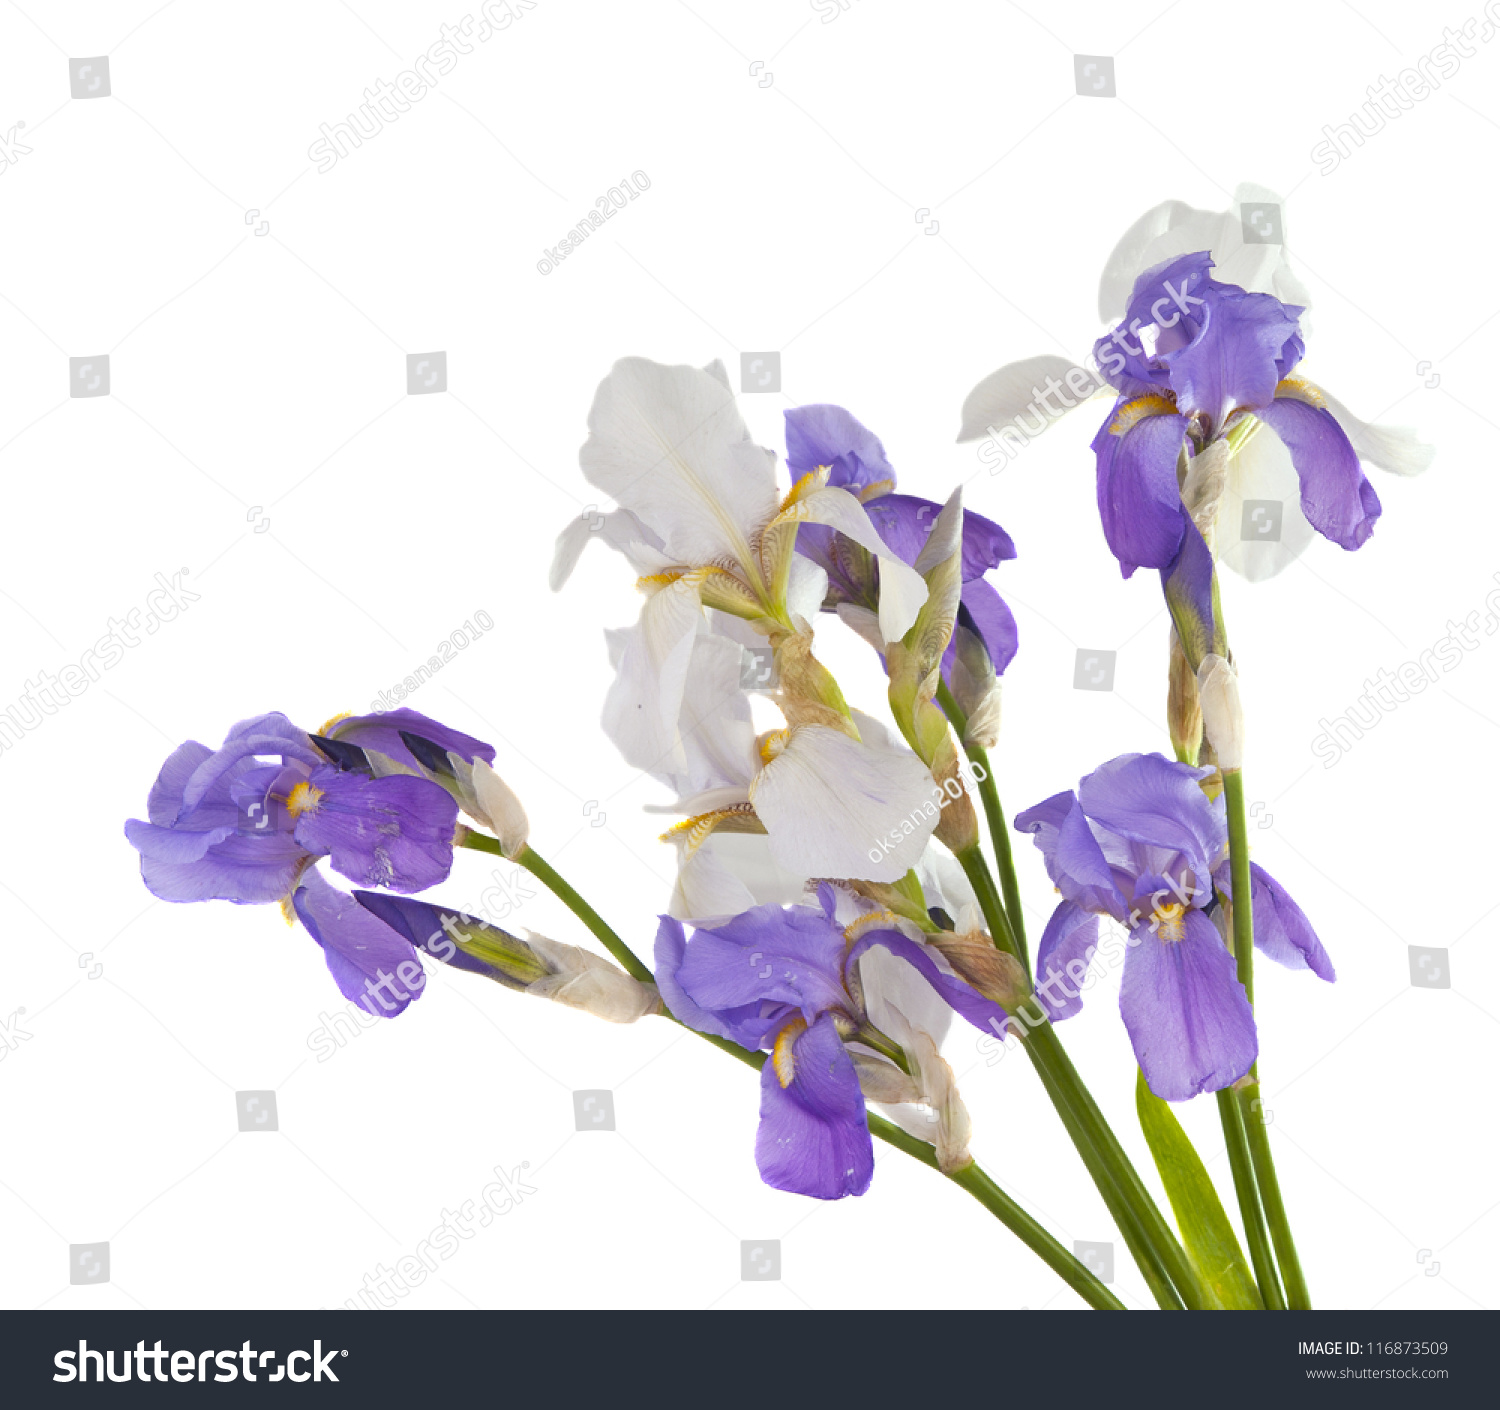 Iris Bouquet Of Flowers Isolated On White Background Stock Photo